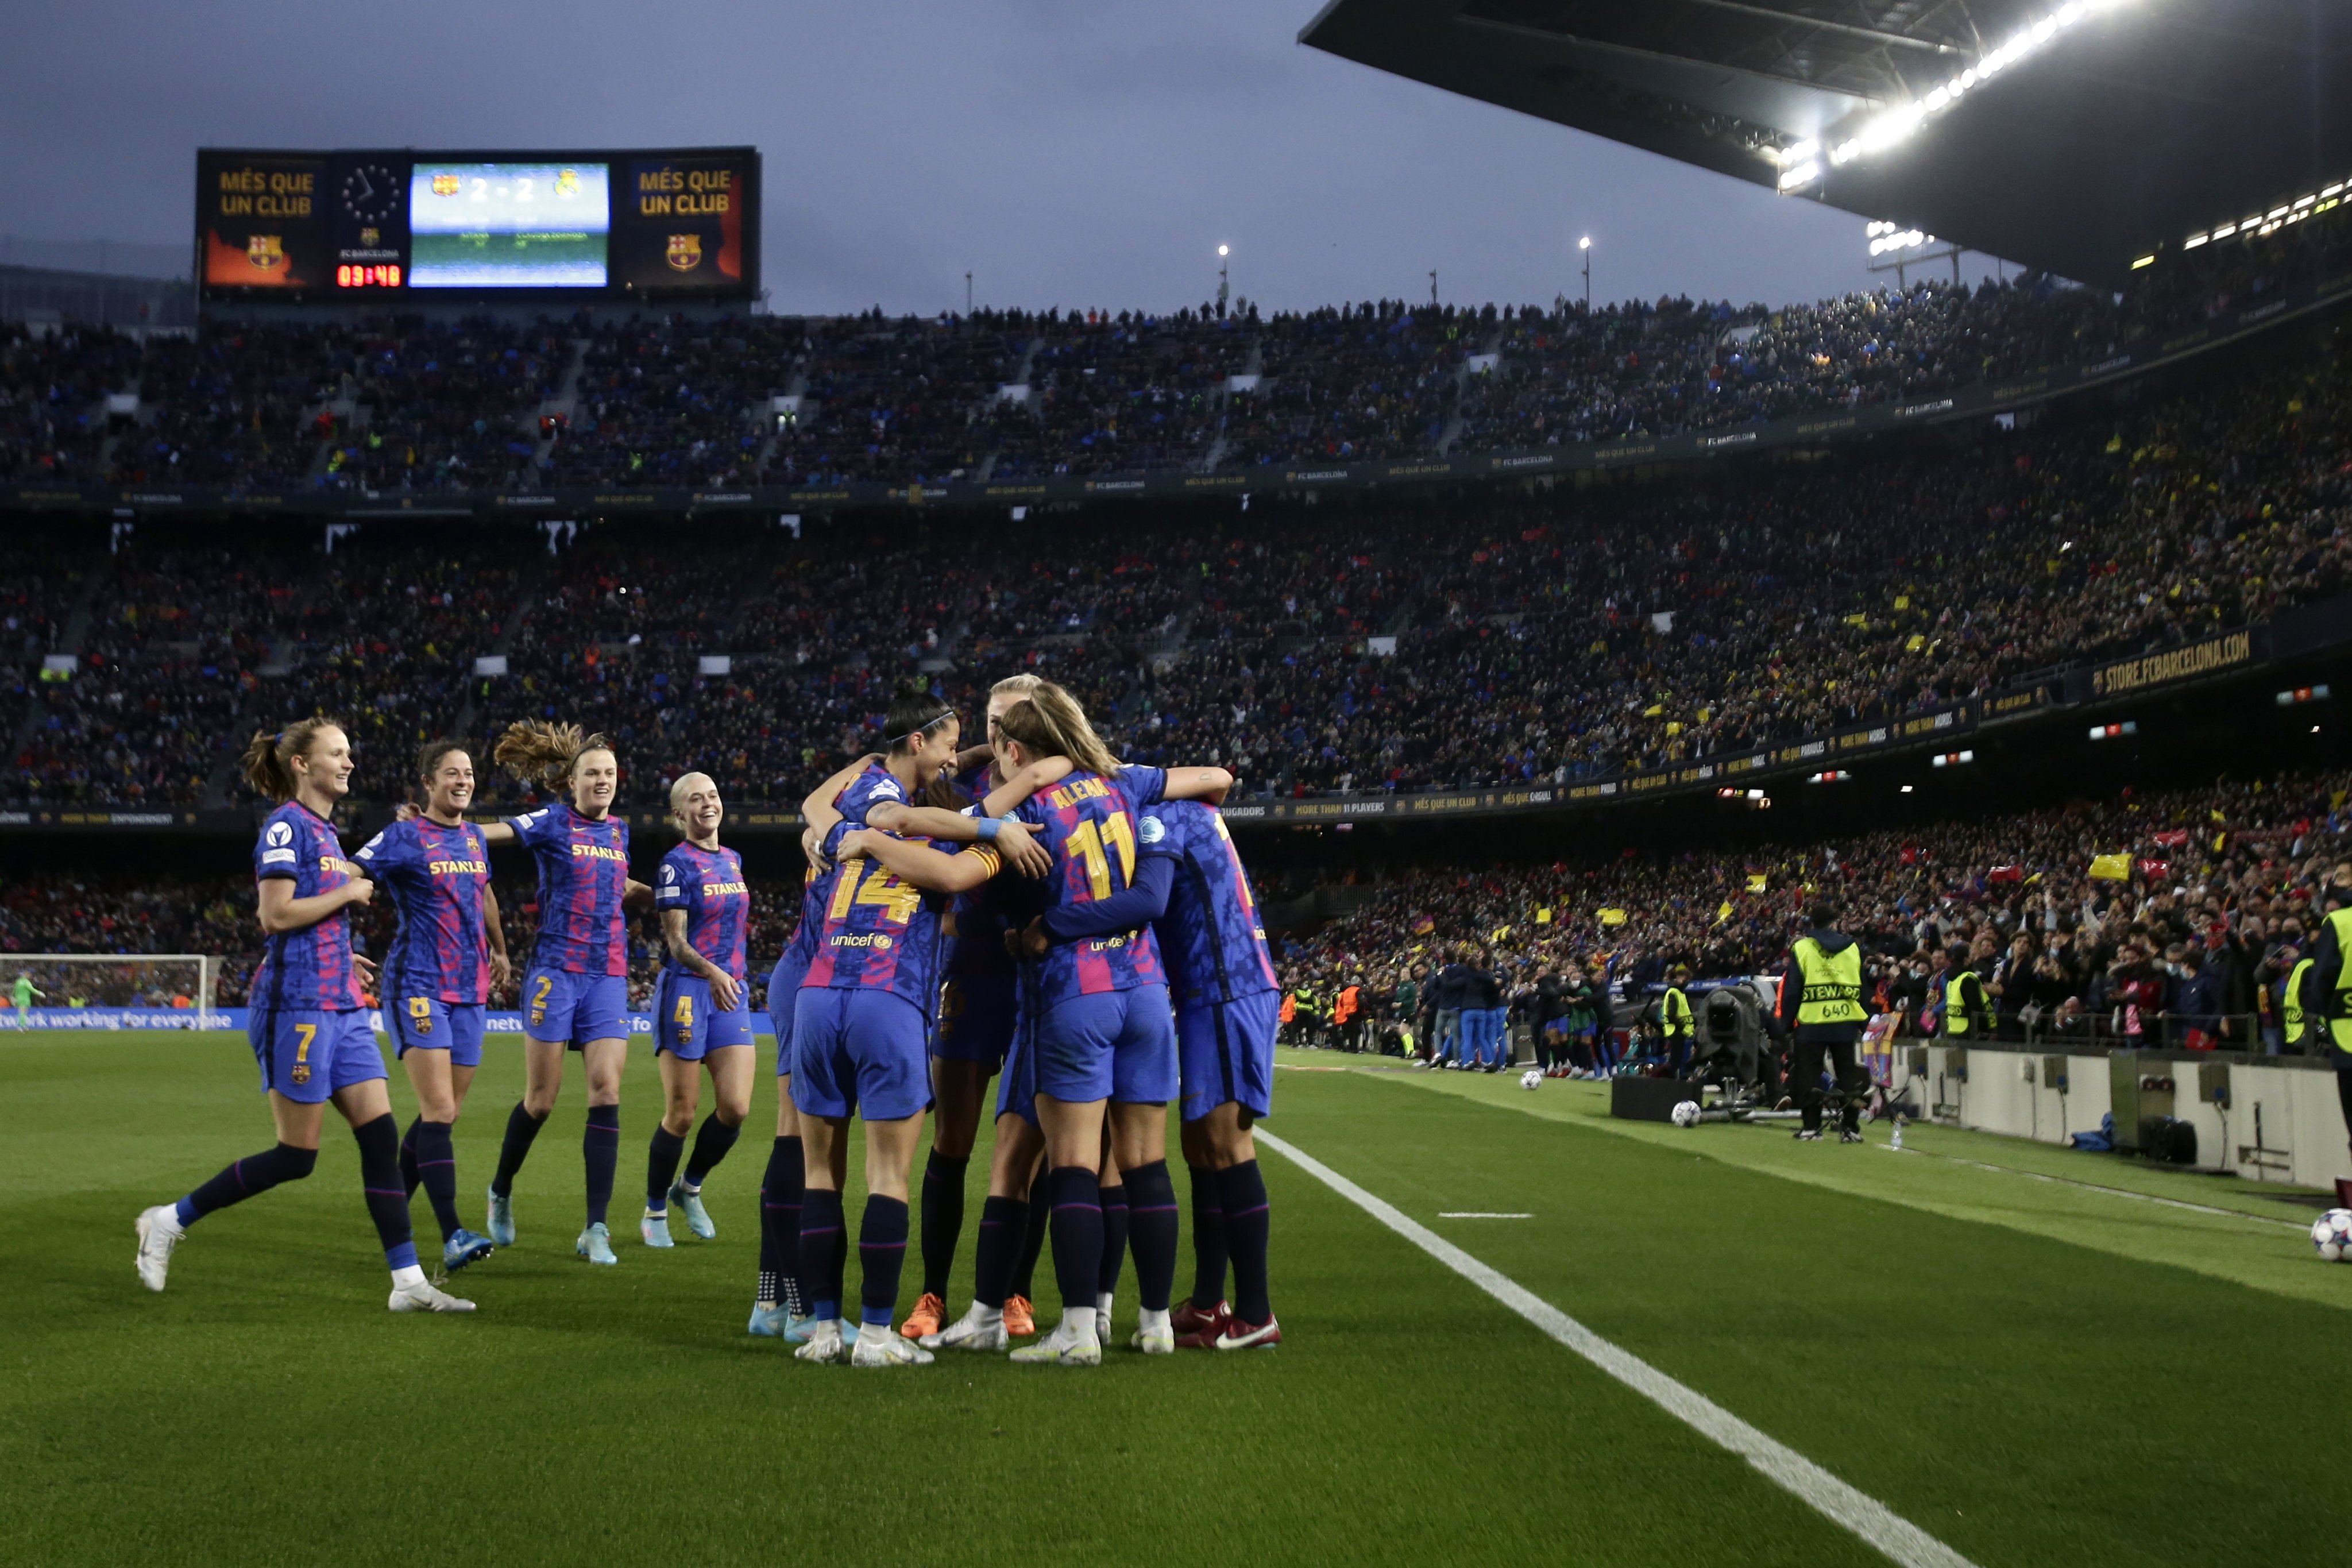 Making history: 91,553 attend Barcelona-Real Madrid women's Champions  League game at Camp Nou - The Boston Globe